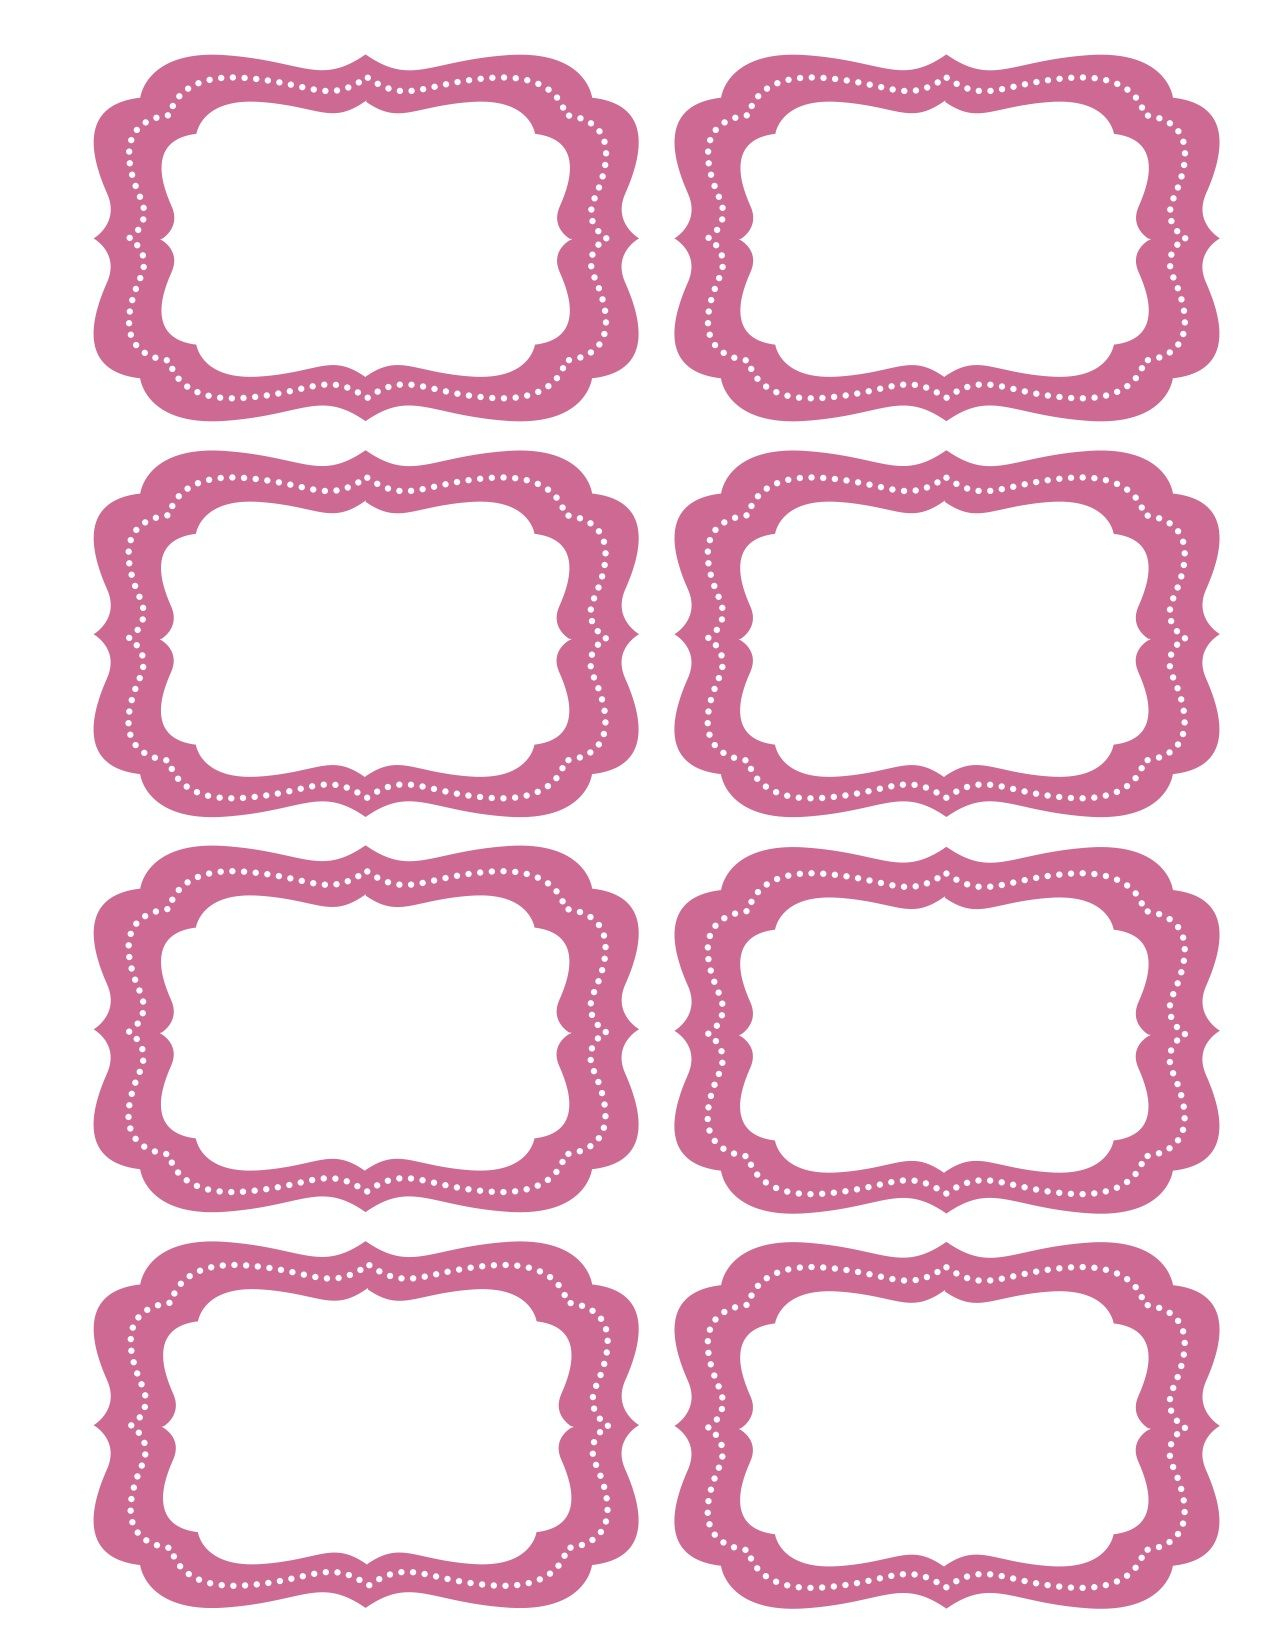 Free Printable Bag Label Templates | Candy Labels Blank Image - Free Printable Candy Buffet Labels Templates